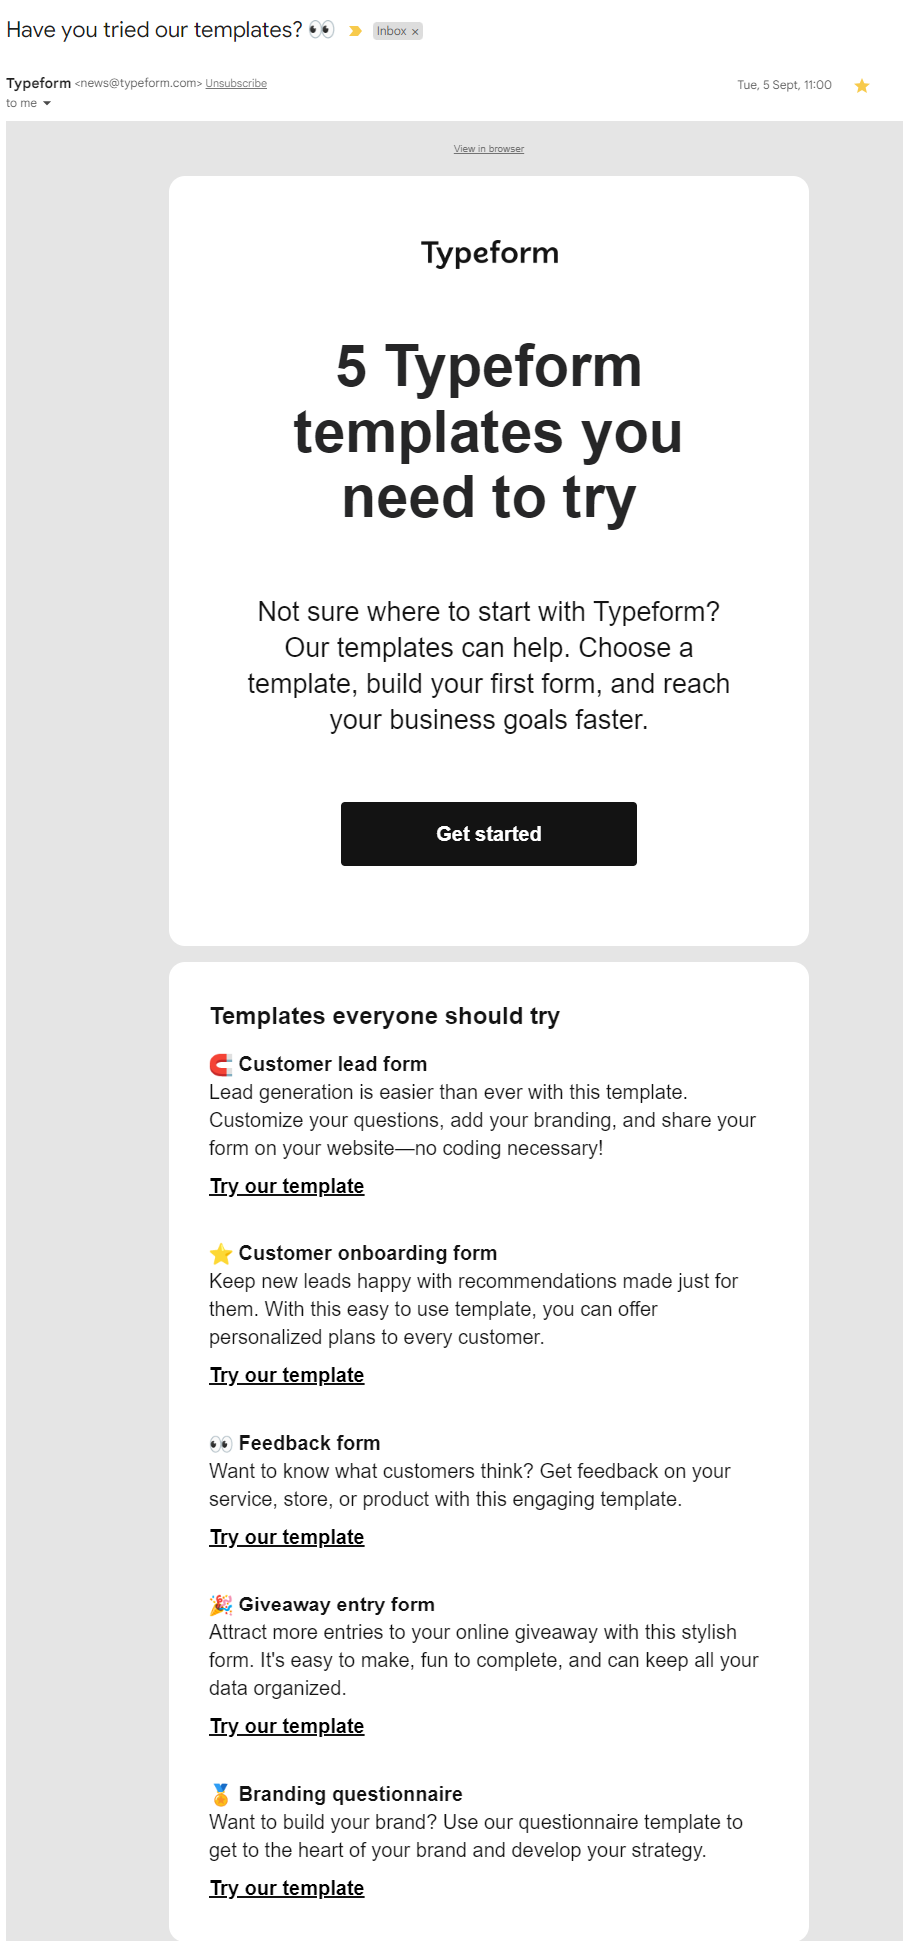 Addressing Obstacles and Anxieties in SaaS Onboarding Emails: Screenshot of Typeform's email